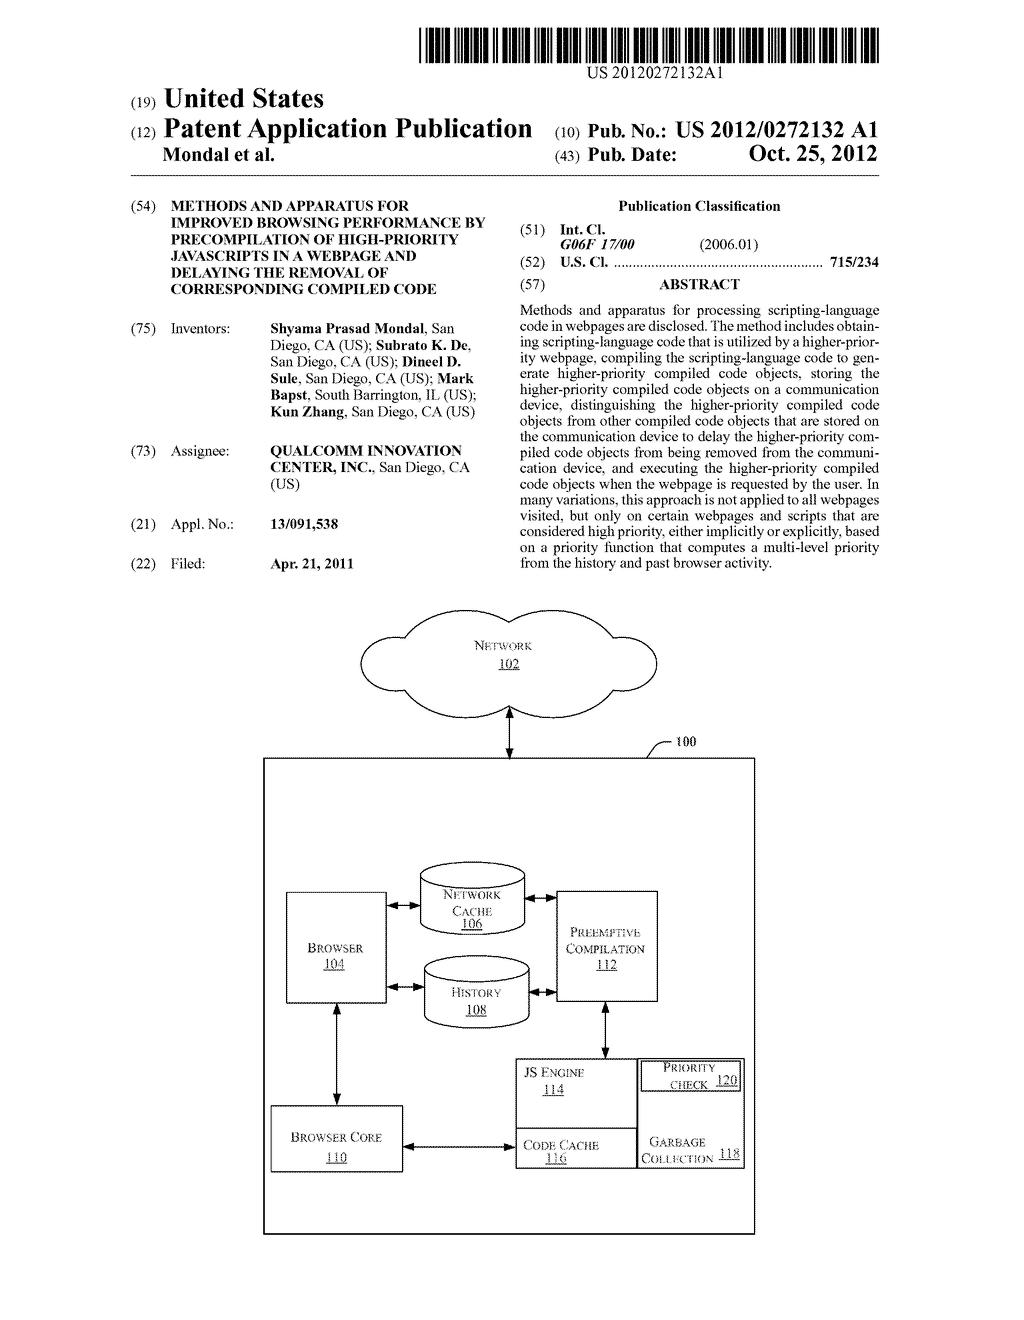 METHODS AND APPARATUS FOR IMPROVED BROWSING PERFORMANCE BY PRECOMPILATION     OF HIGH-PRIORITY JAVASCRIPTS IN A WEBPAGE AND DELAYING THE REMOVAL OF     CORRESPONDING COMPILED CODE - diagram, schematic, and image 01